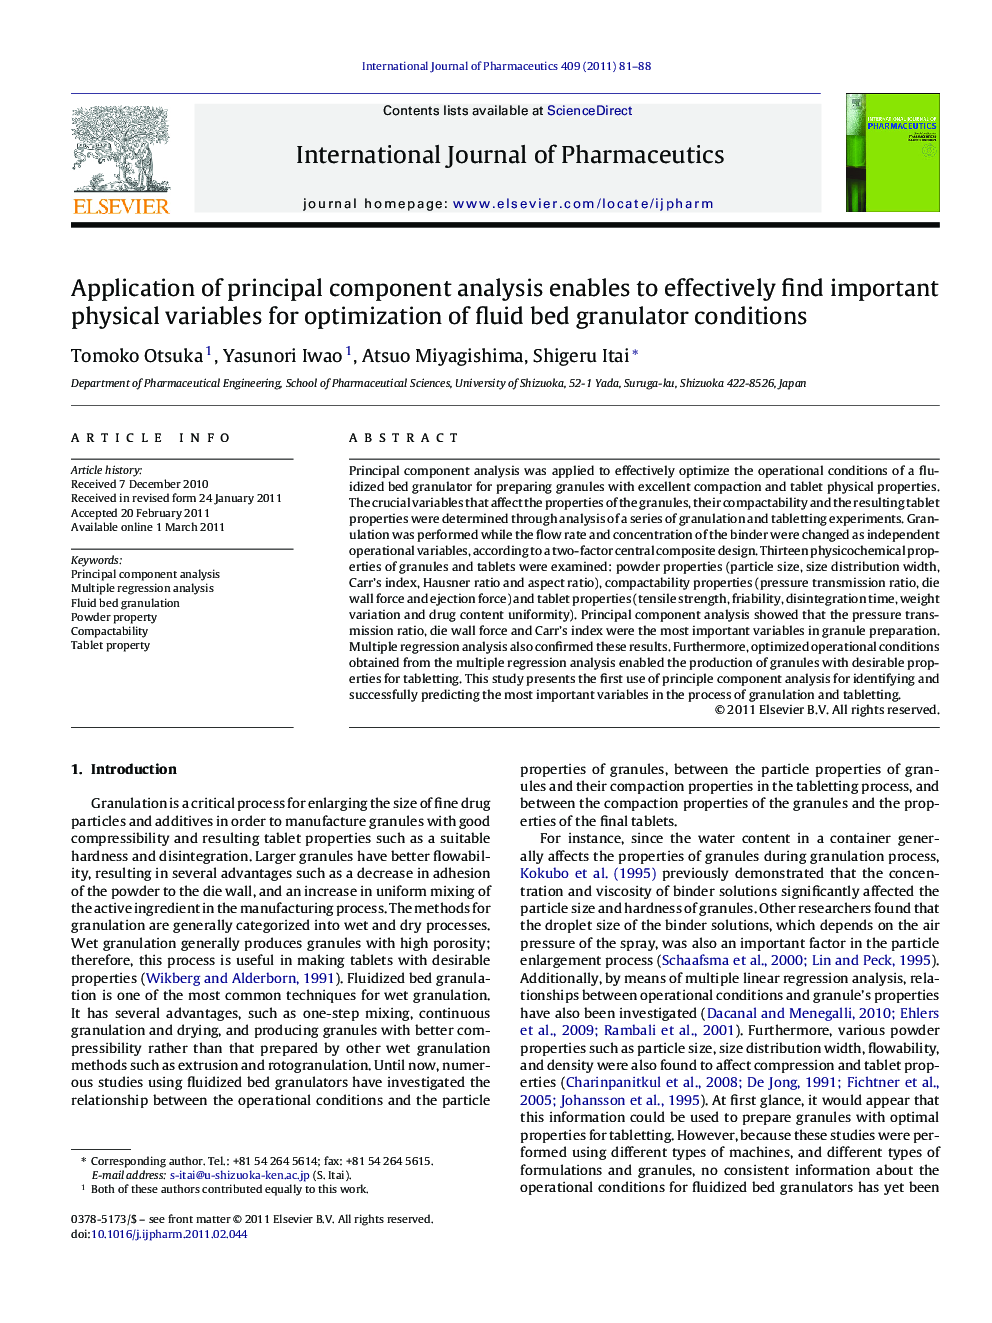 Application of principal component analysis enables to effectively find important physical variables for optimization of fluid bed granulator conditions